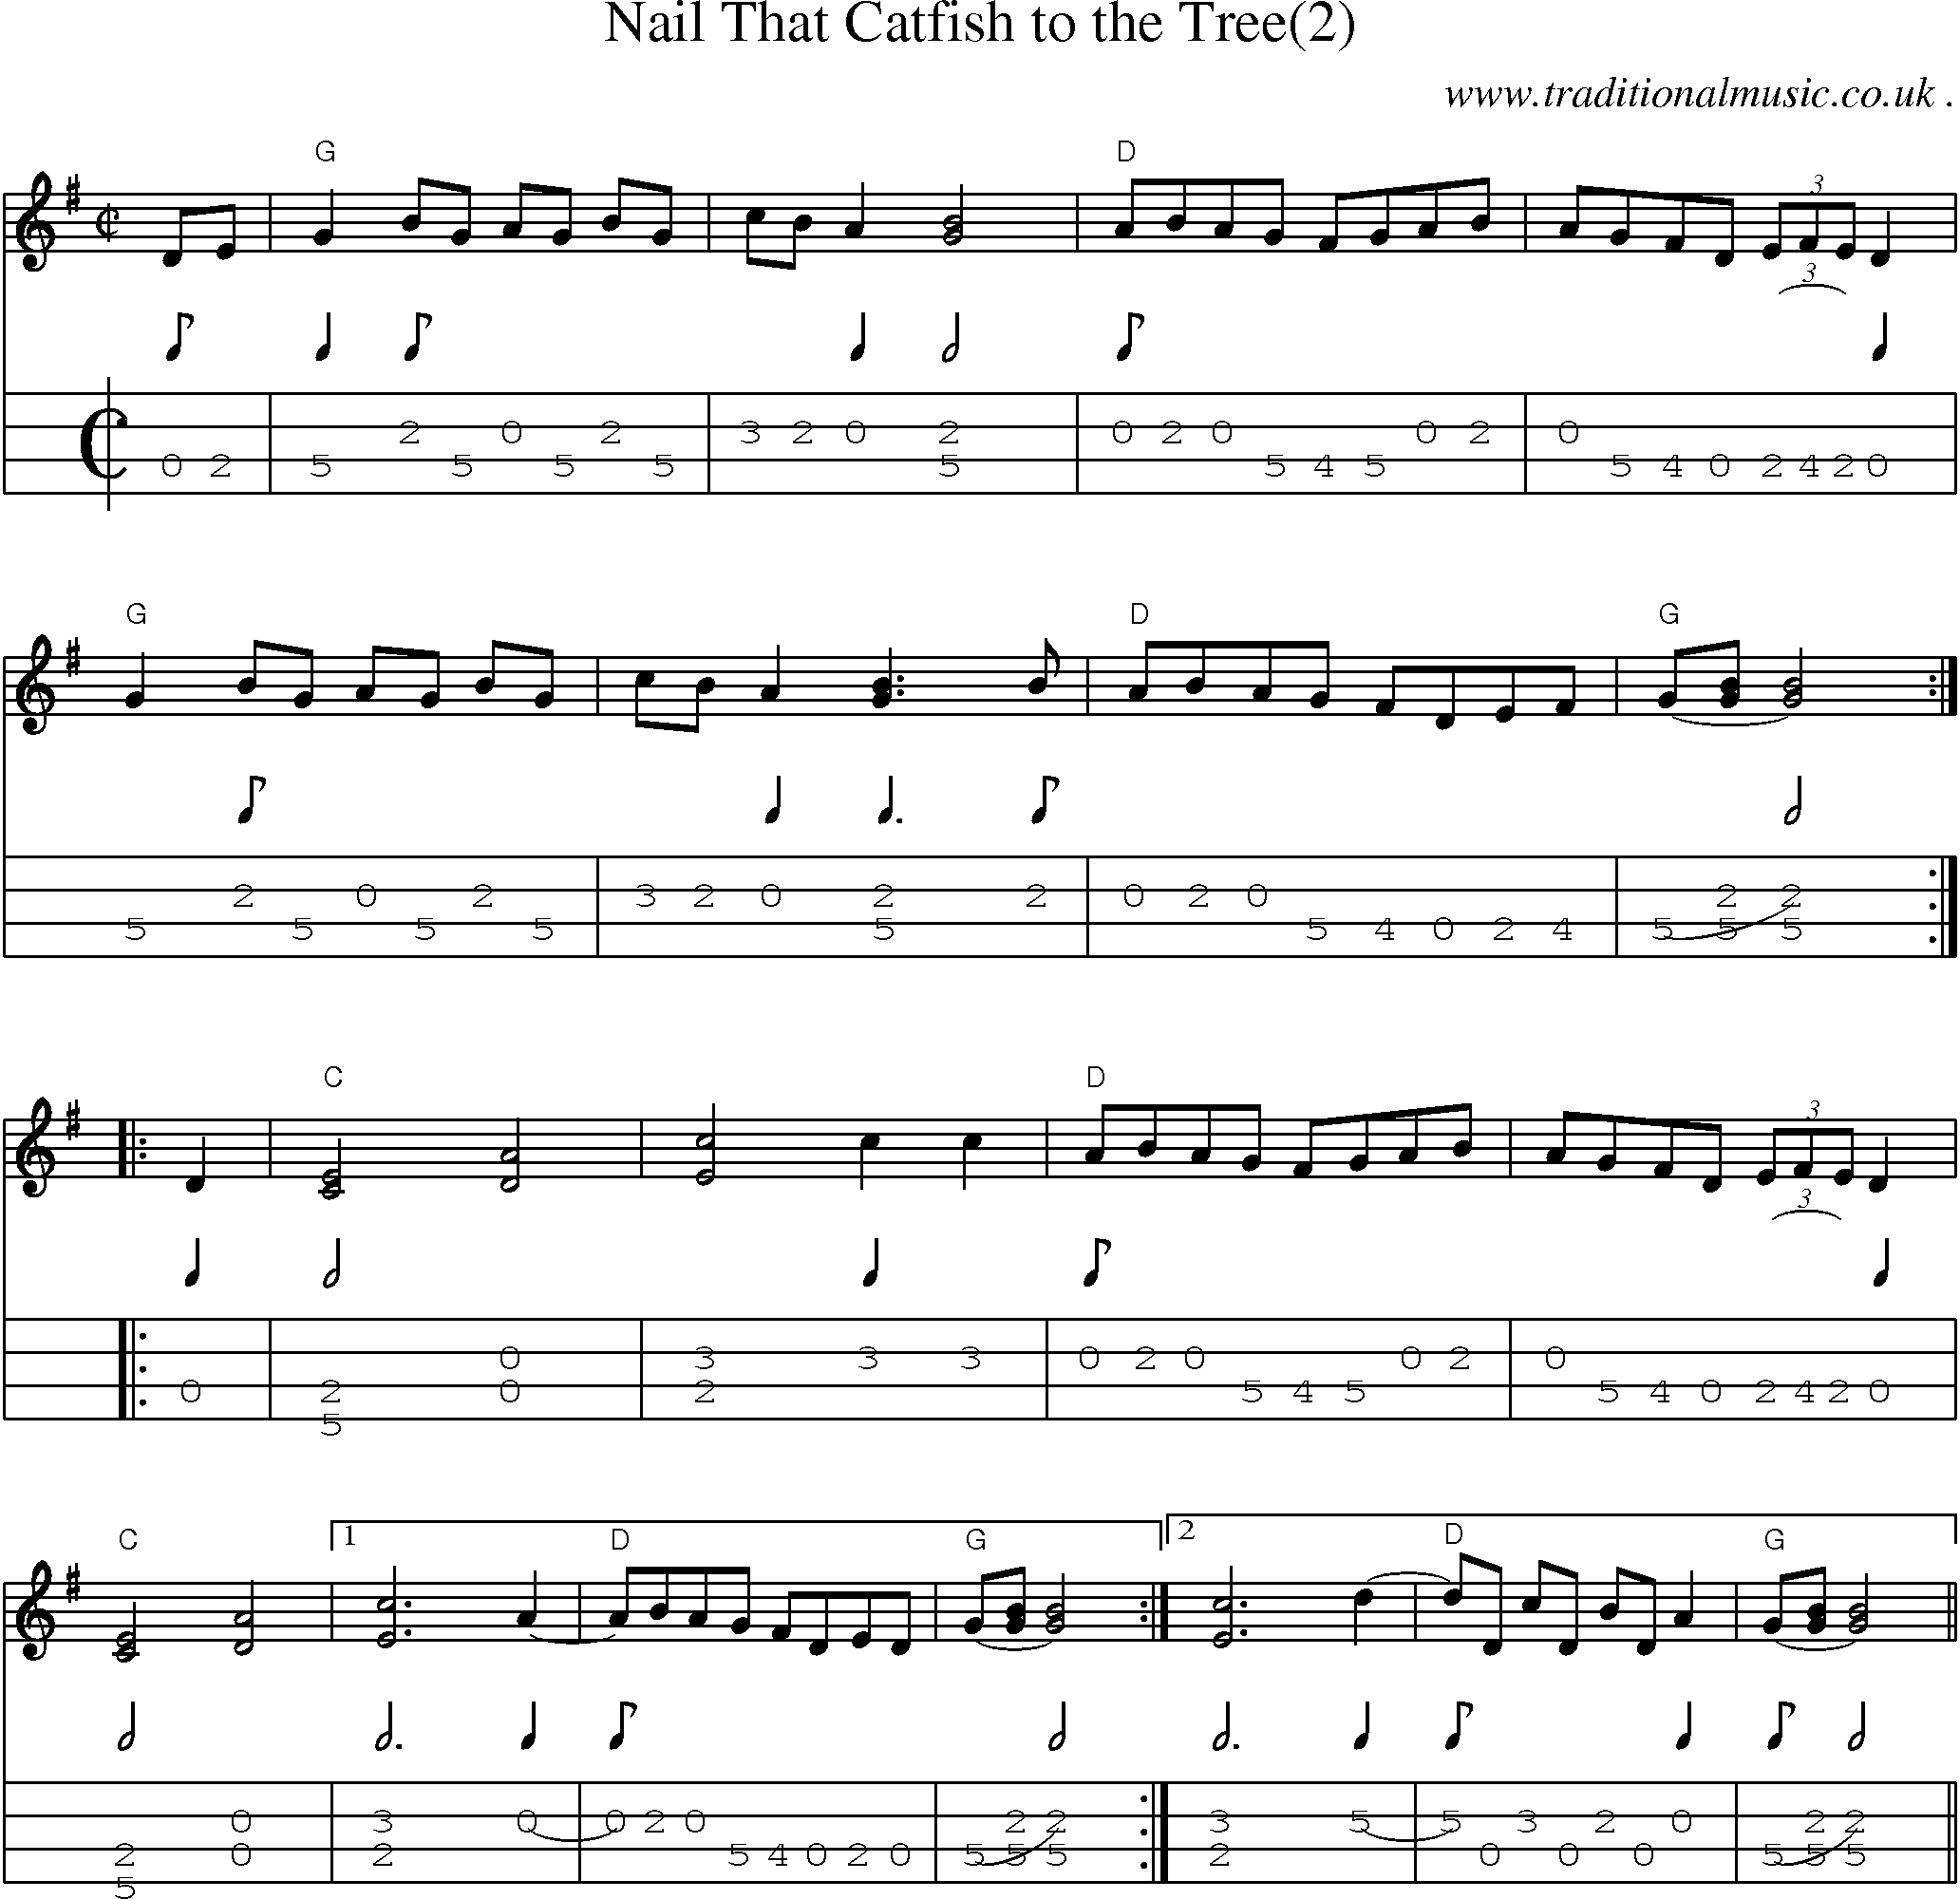 Music Score and Mandolin Tabs for Nail That Catfish To The Tree(2)